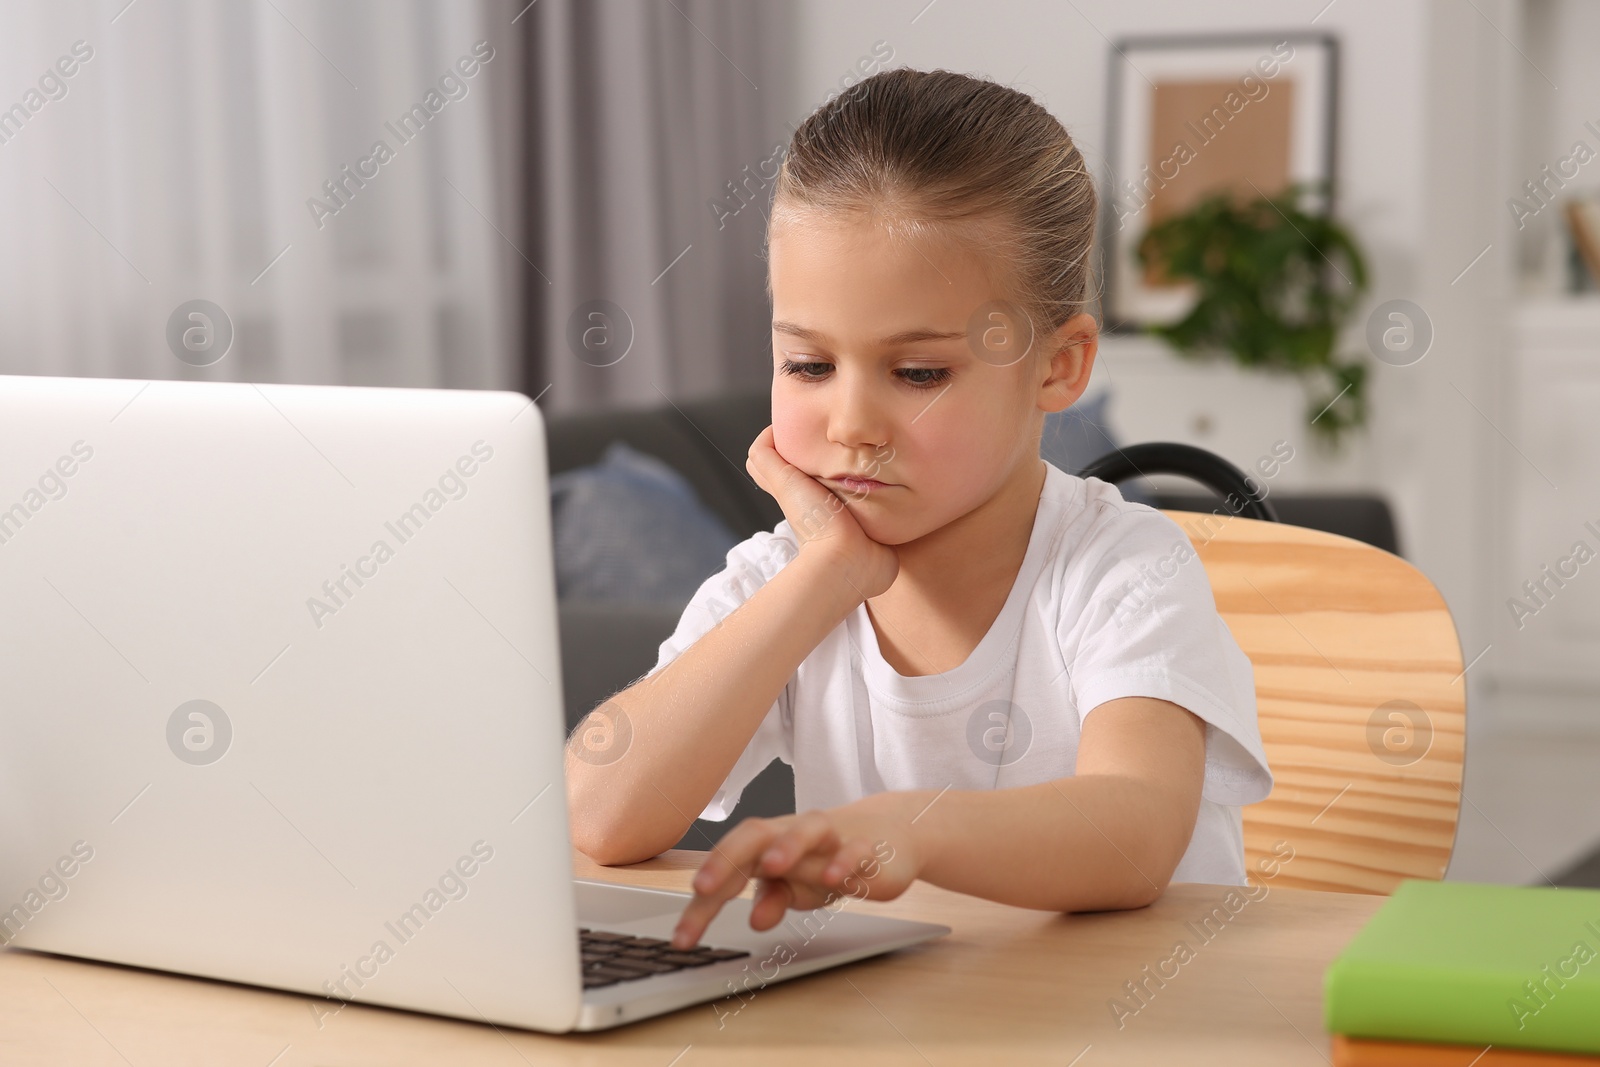 Photo of Little girl using laptop at table indoors. Internet addiction